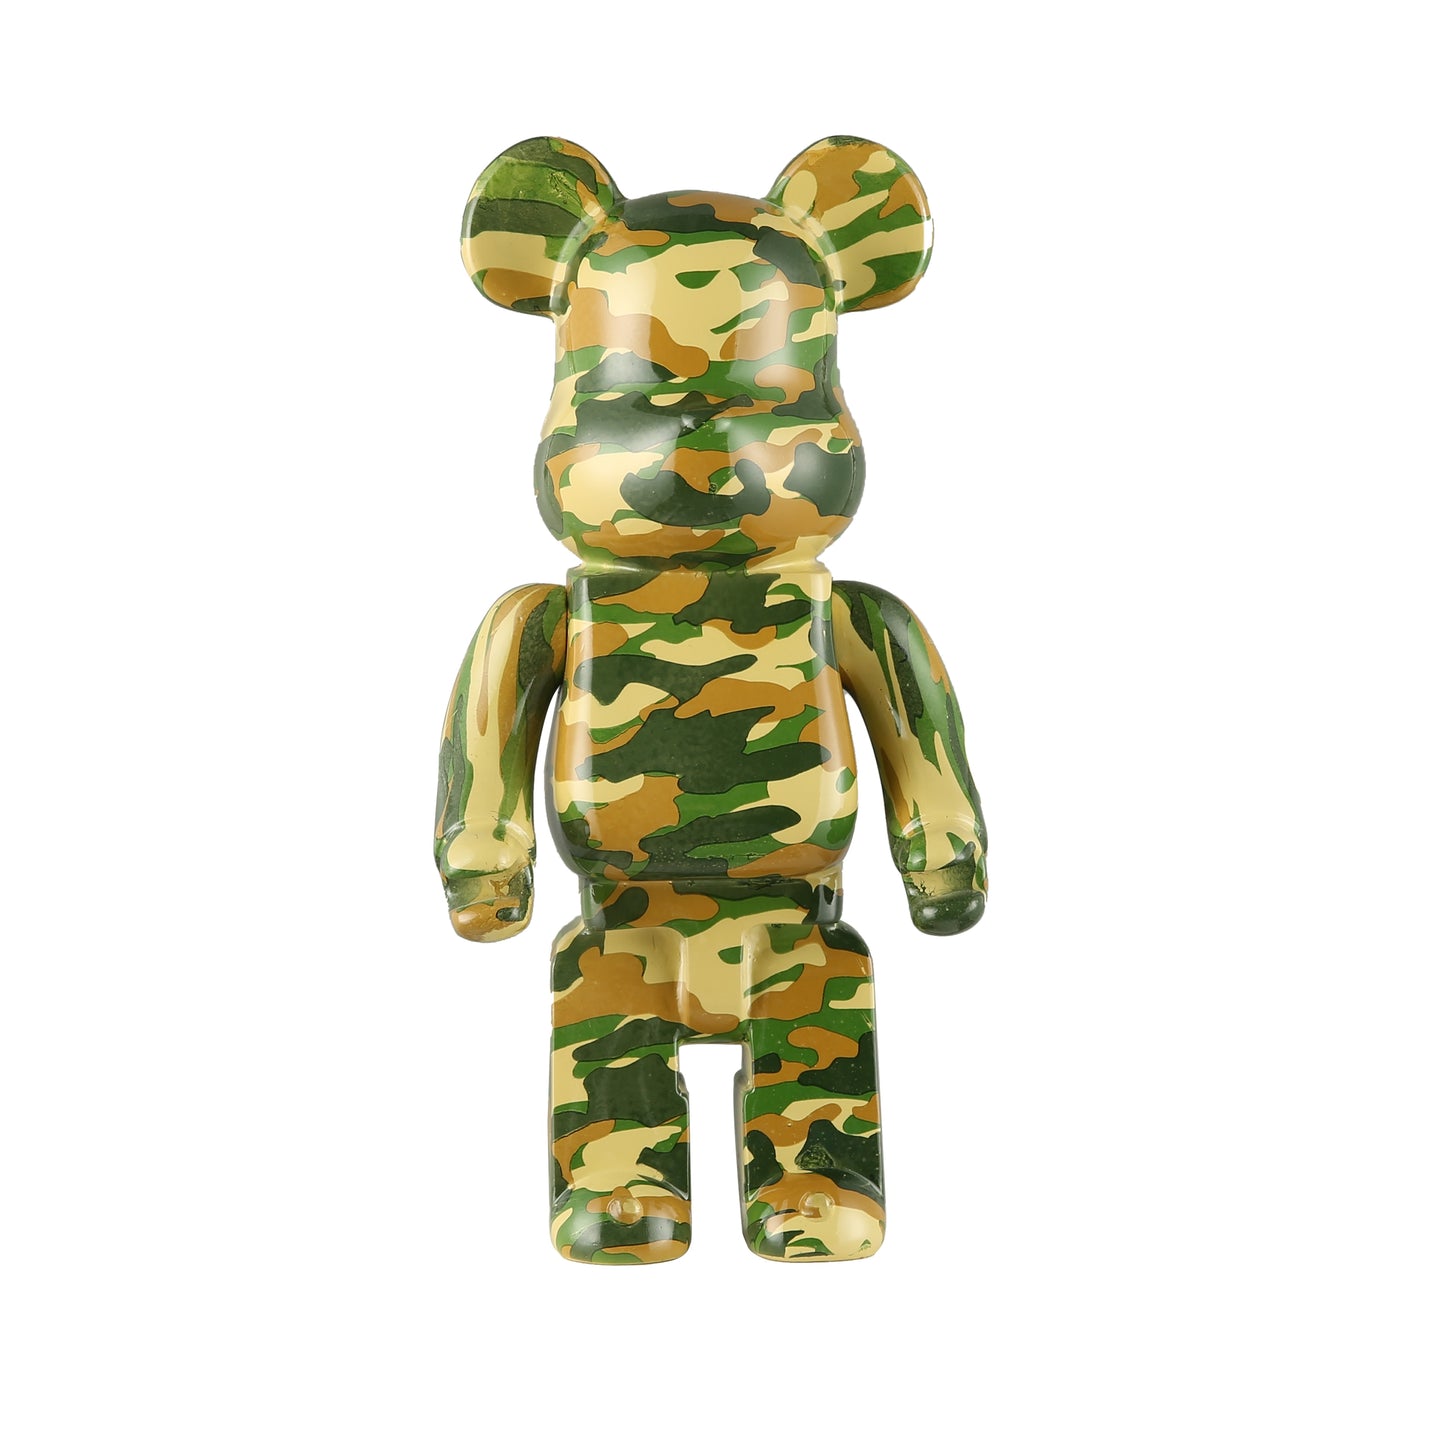 TEEK - 11 inch Solid and Camo Color Various Collectible Figurines HOME DECOR theteekdotcom Camouflage 2  